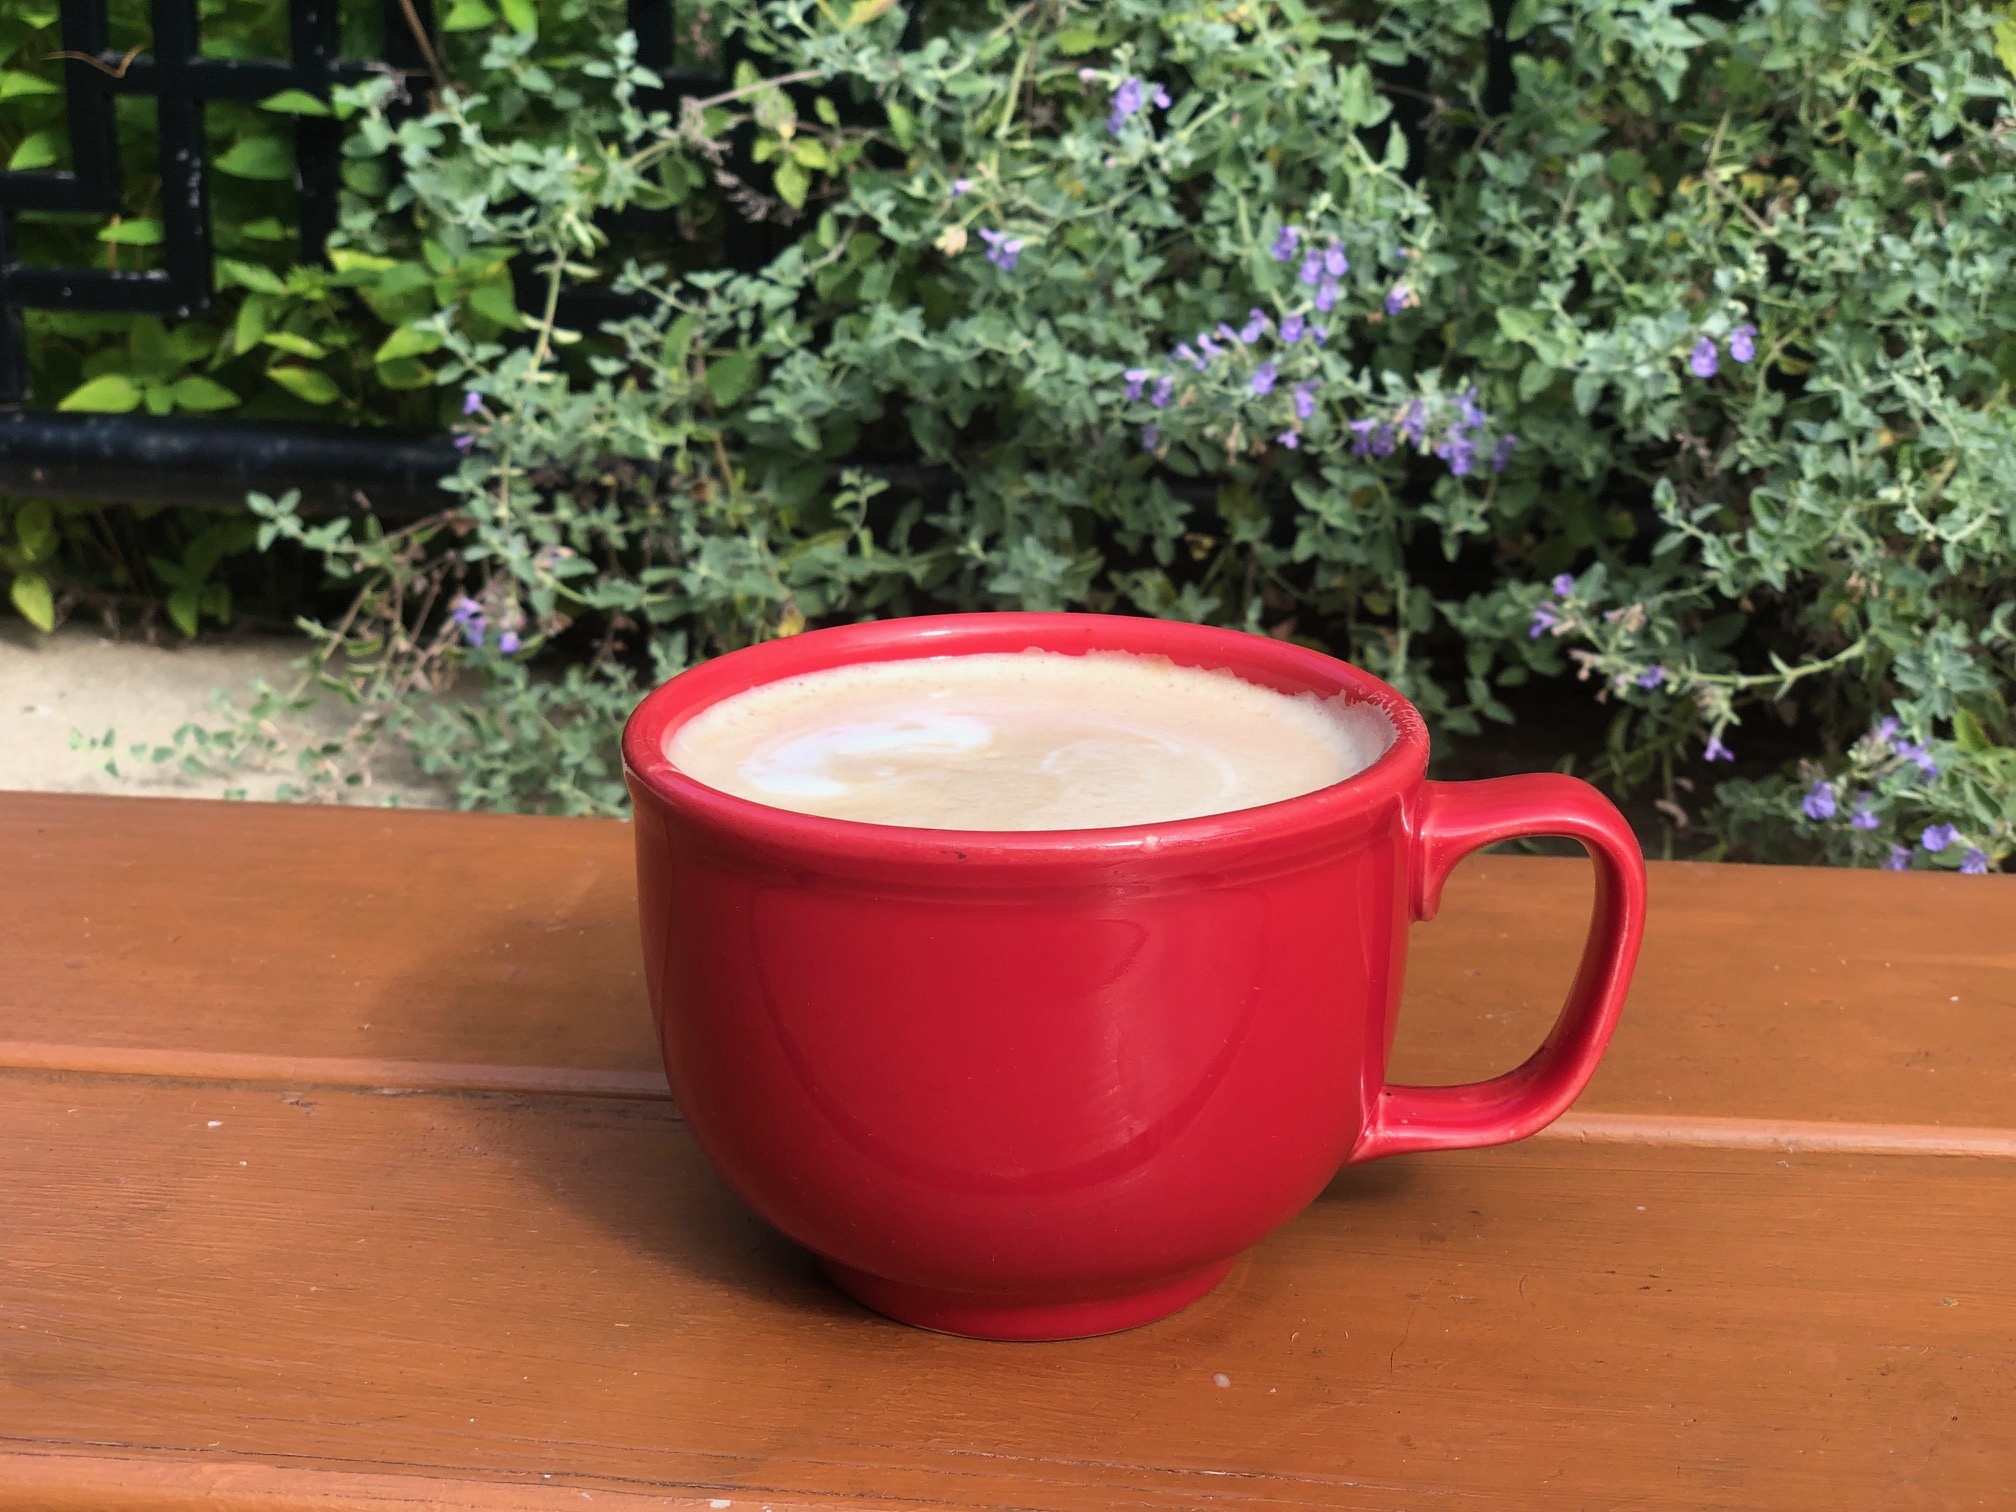 In a large red mug, there is a pumpkin pie latte from Aroma Cafe on a wooden patio table with pretty bushes and flowers behind it. Photo by Alyssa Buckley.